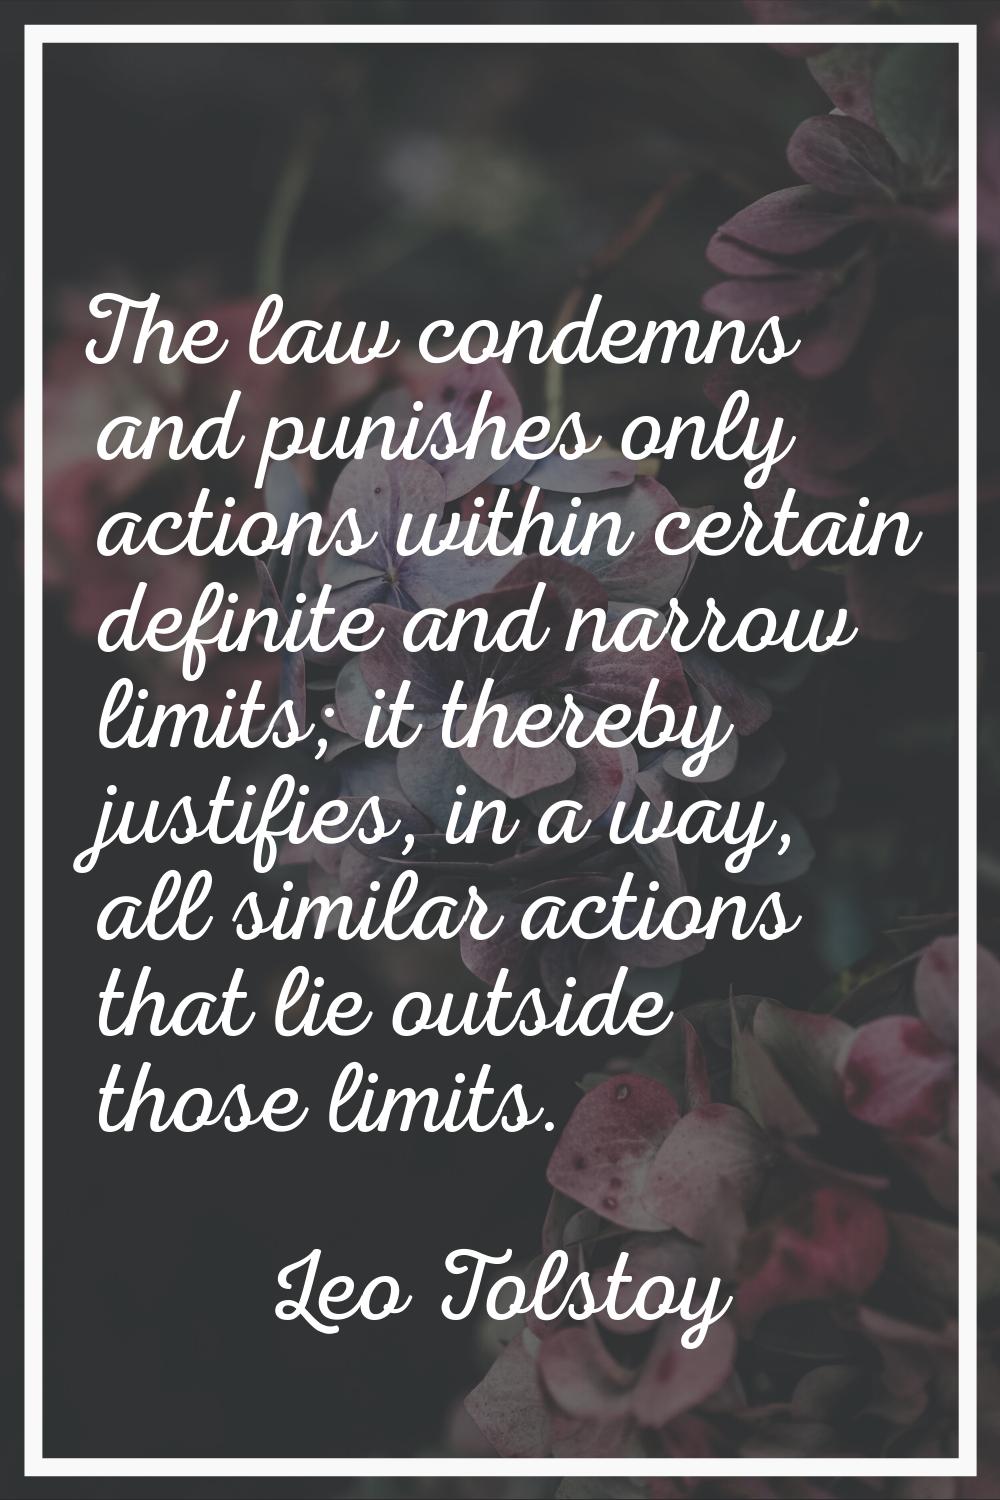 The law condemns and punishes only actions within certain definite and narrow limits; it thereby ju